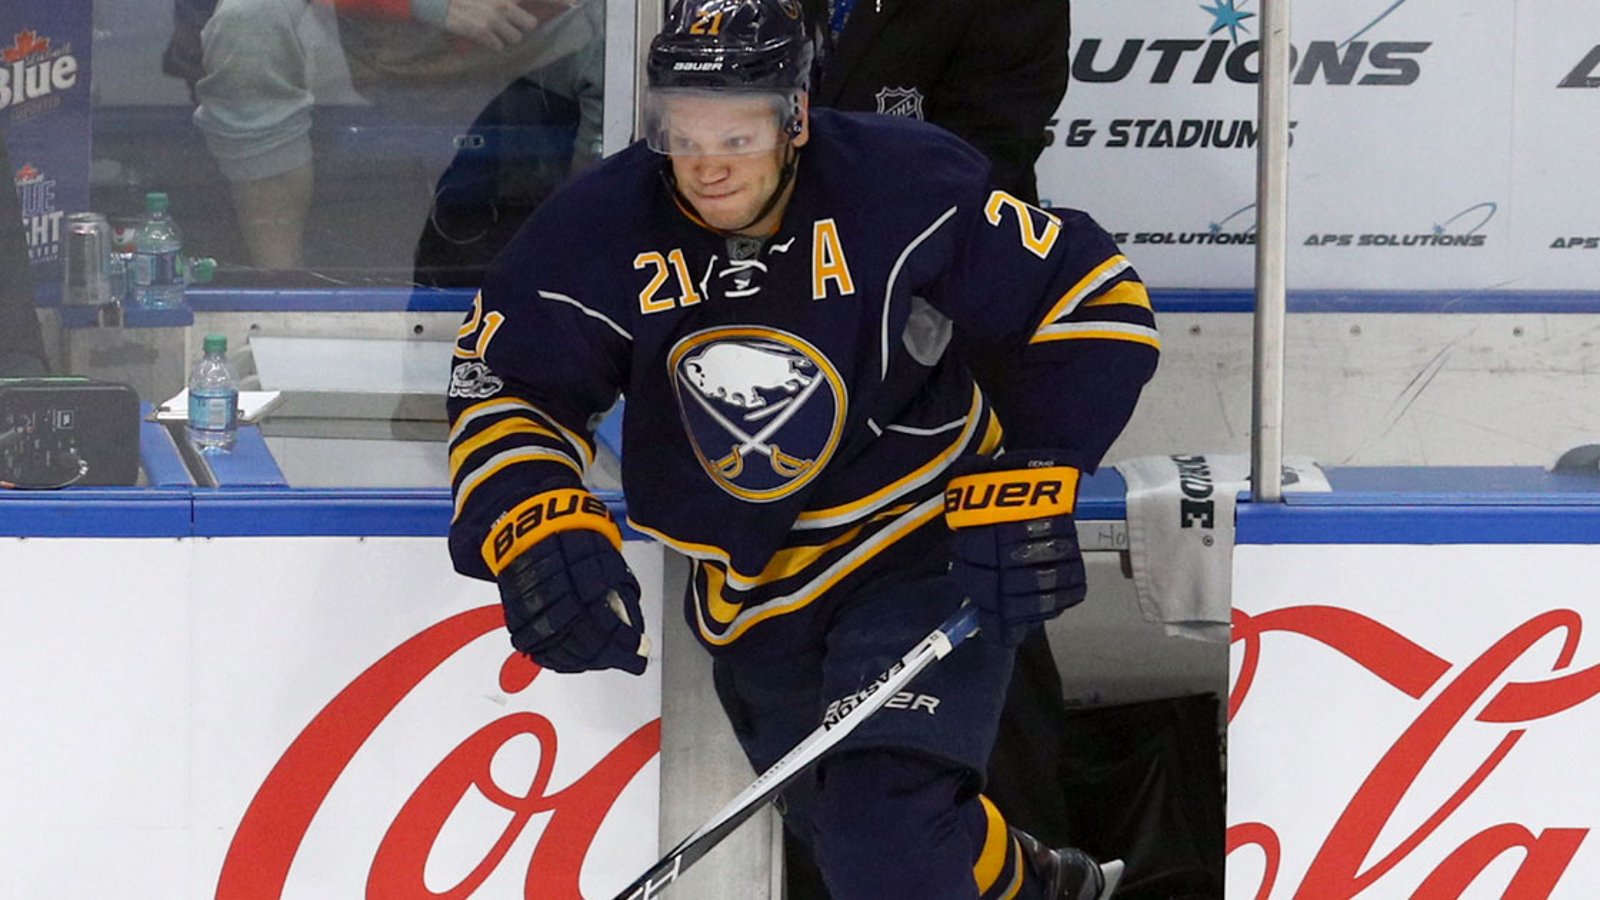 Breaking: New update concerning Kyle Okposo's tragic health condition!